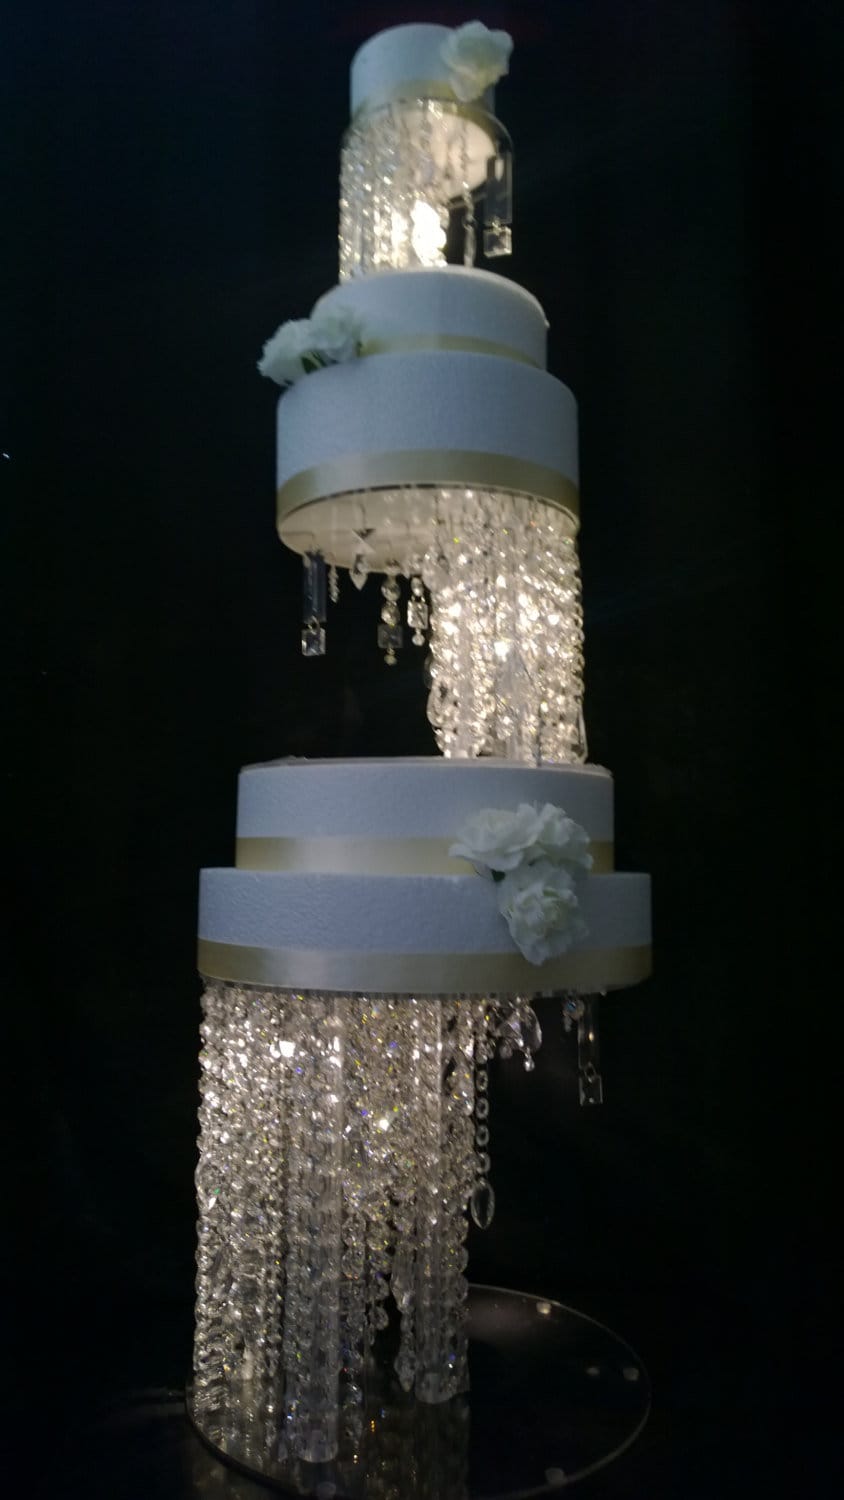 Crystal cake stand + 2 separators chandelier wedding cake with LED Lights,set of 3 pieces side bar Illusion 8